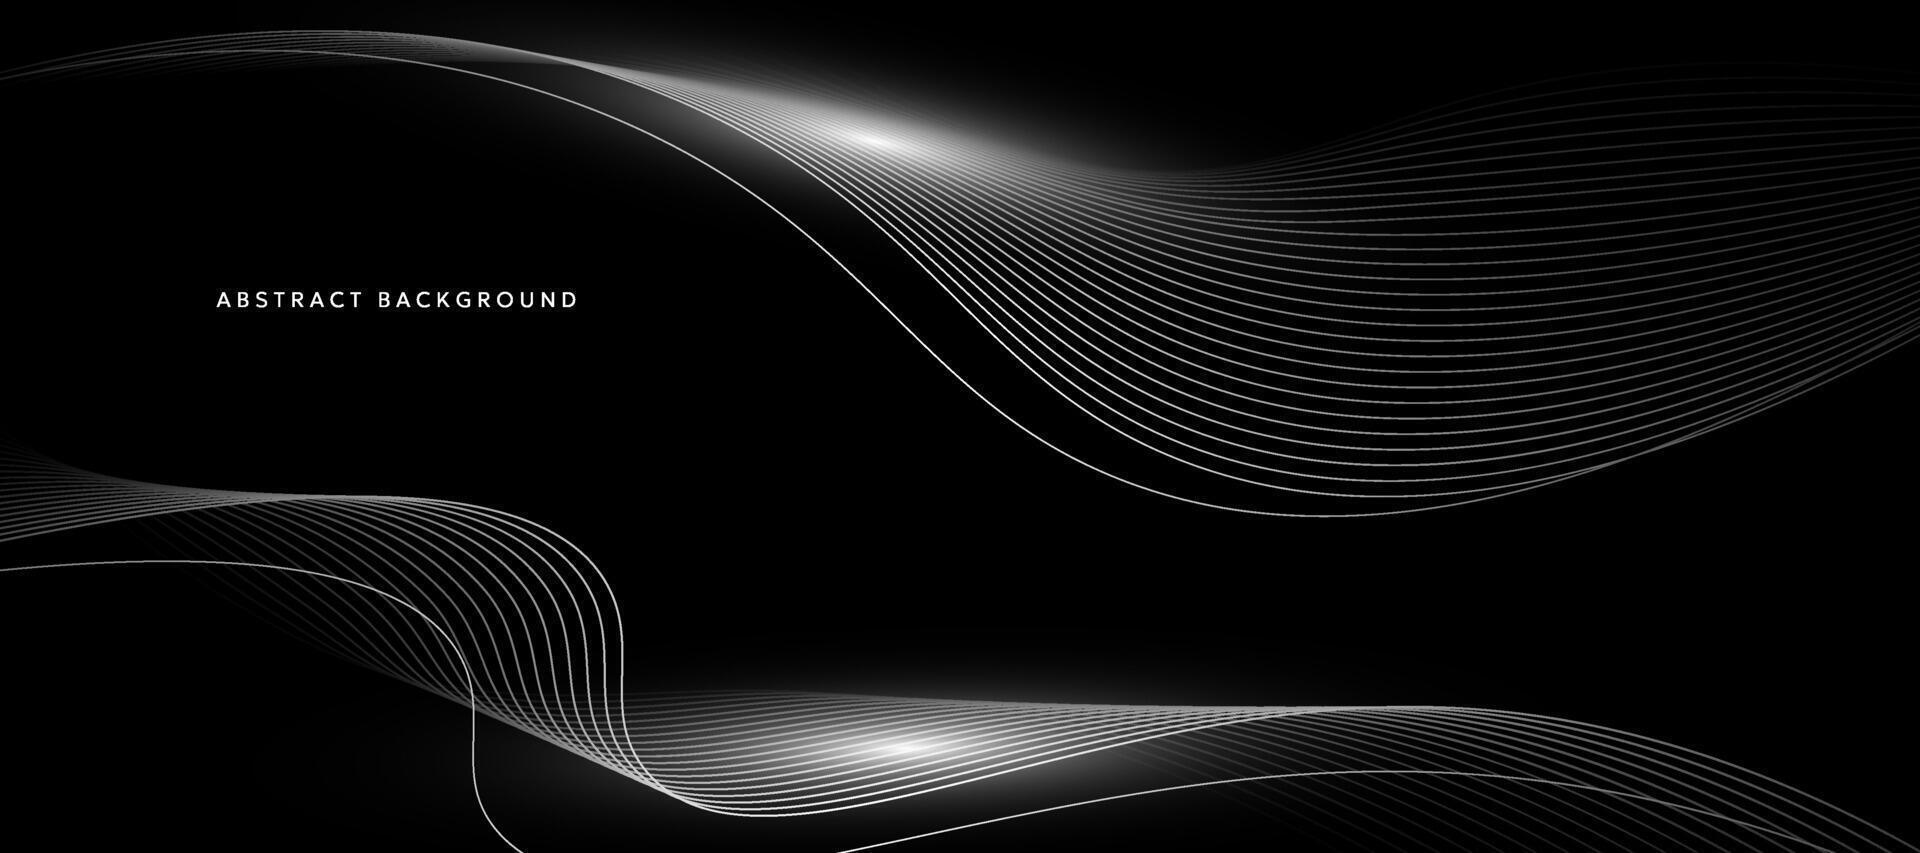 Black abstract background with white curves vector